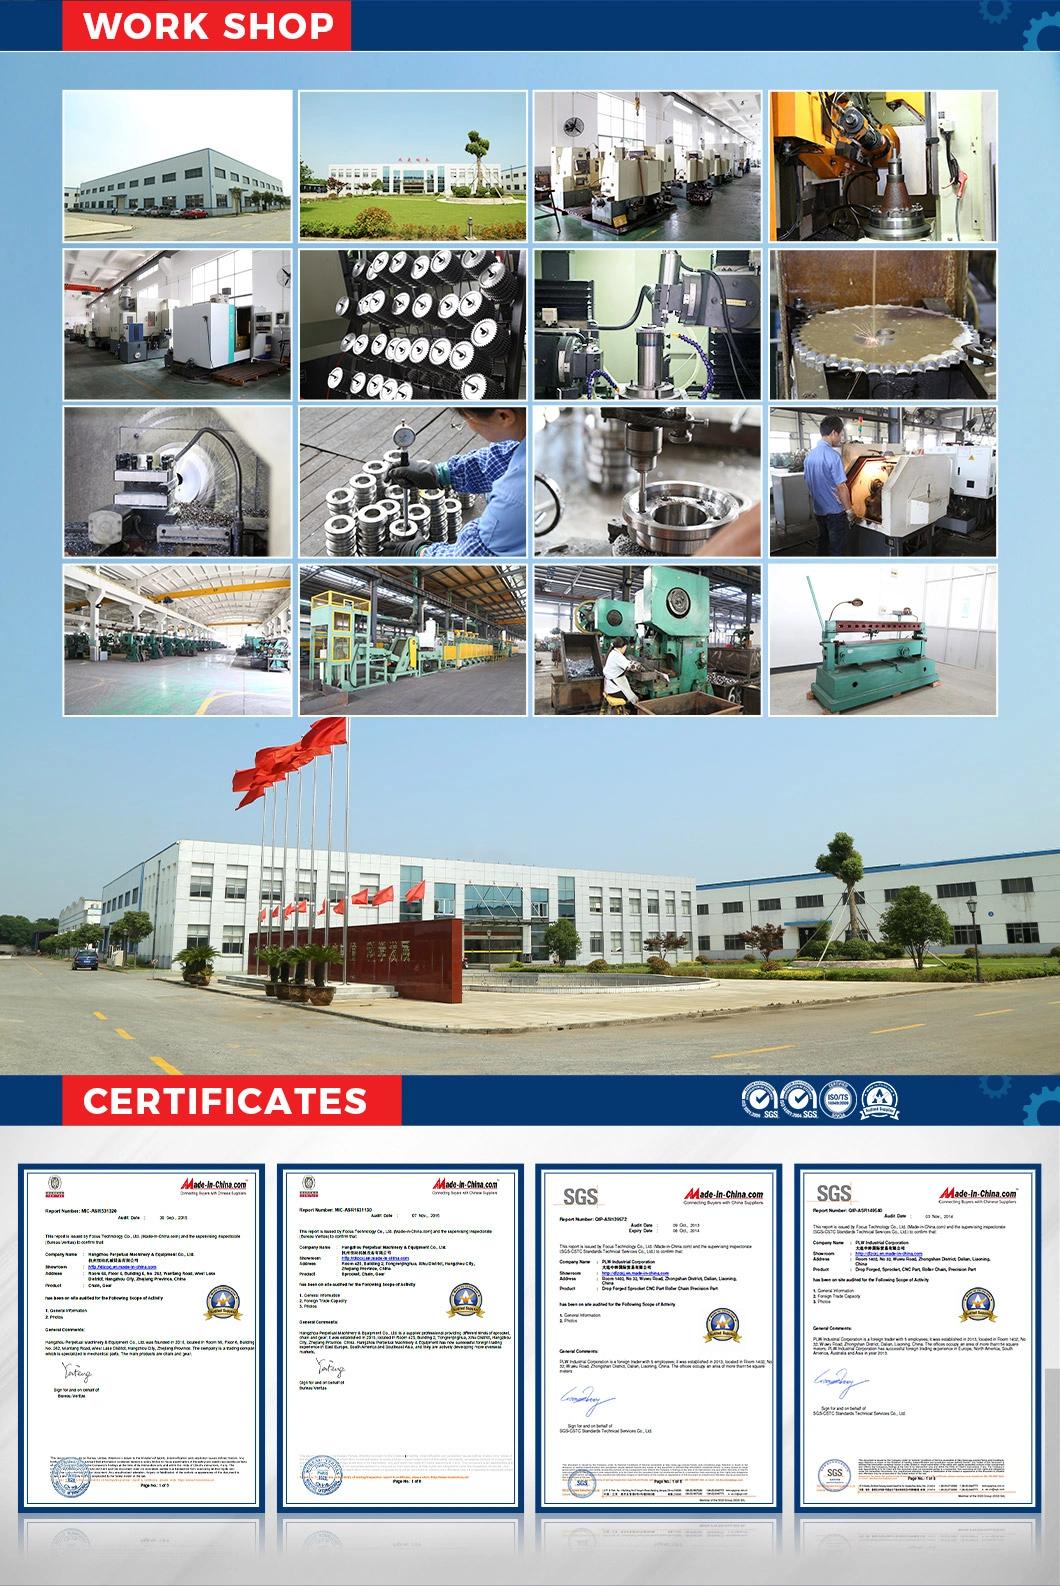 ISO Standard S Type Agricultural Chain From China